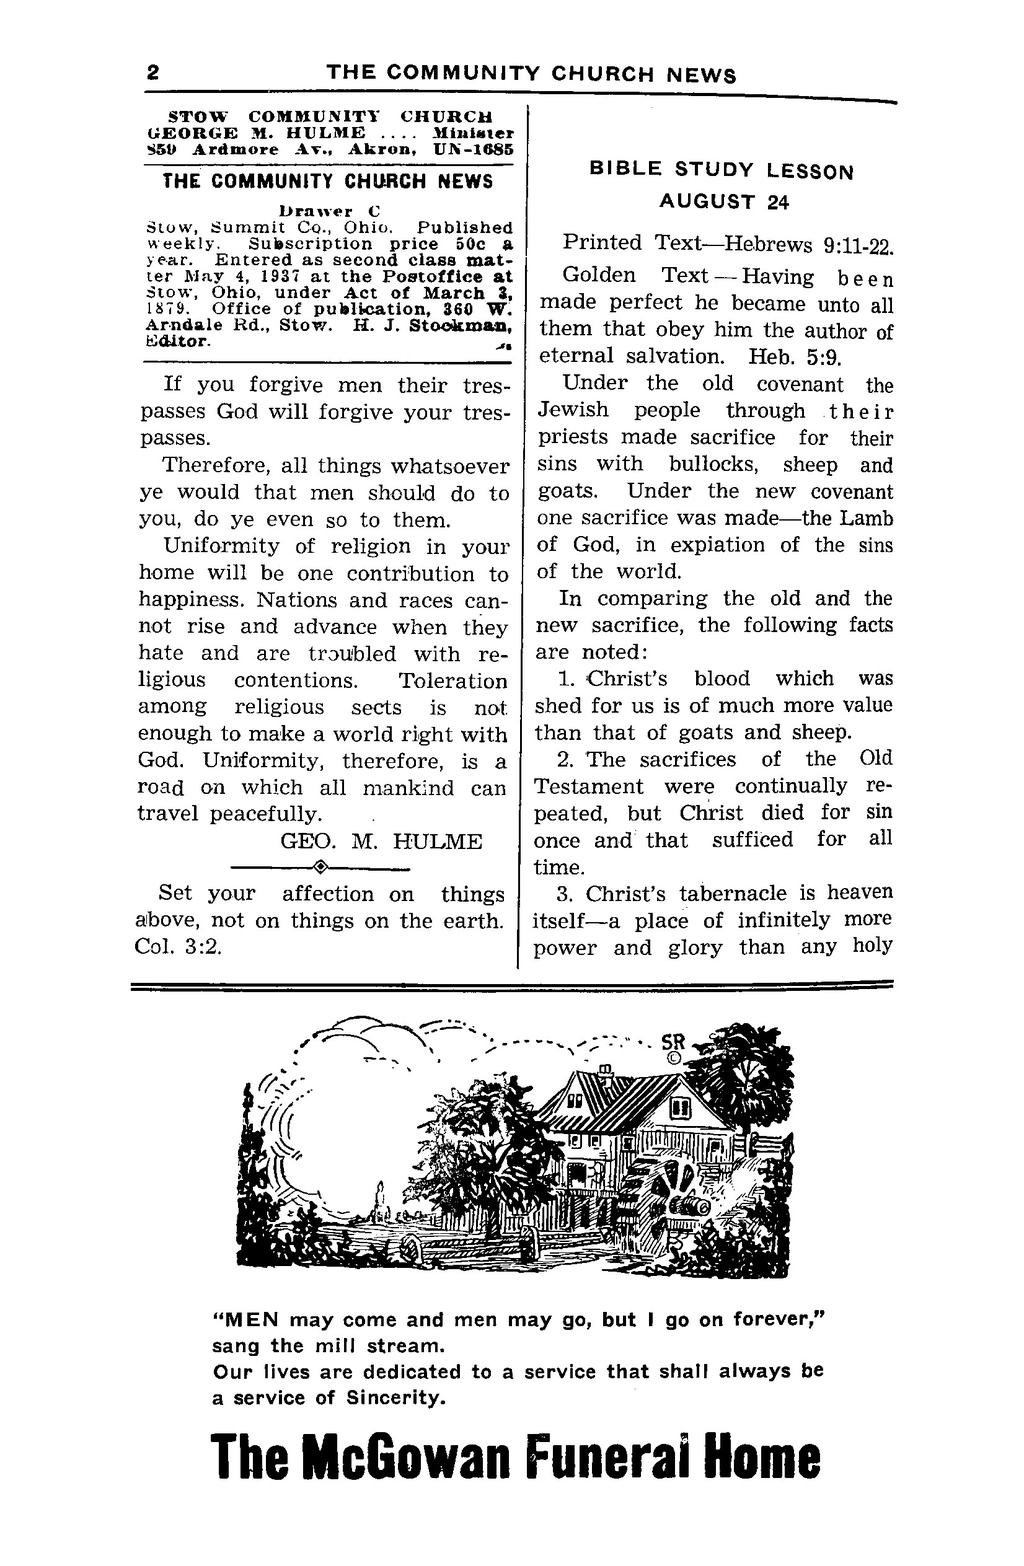 2 THE COMMUNITY CHURCH NEWS 11 STOW COMMUNITY CHURCH GEORGE M. HULME... Milliliter S5D Ardmore AT., Akron, UN-1685 THE COMMUNITY CHURCH NEWS Drawer C Stow, Summit Co., Ohio. Published weekly.